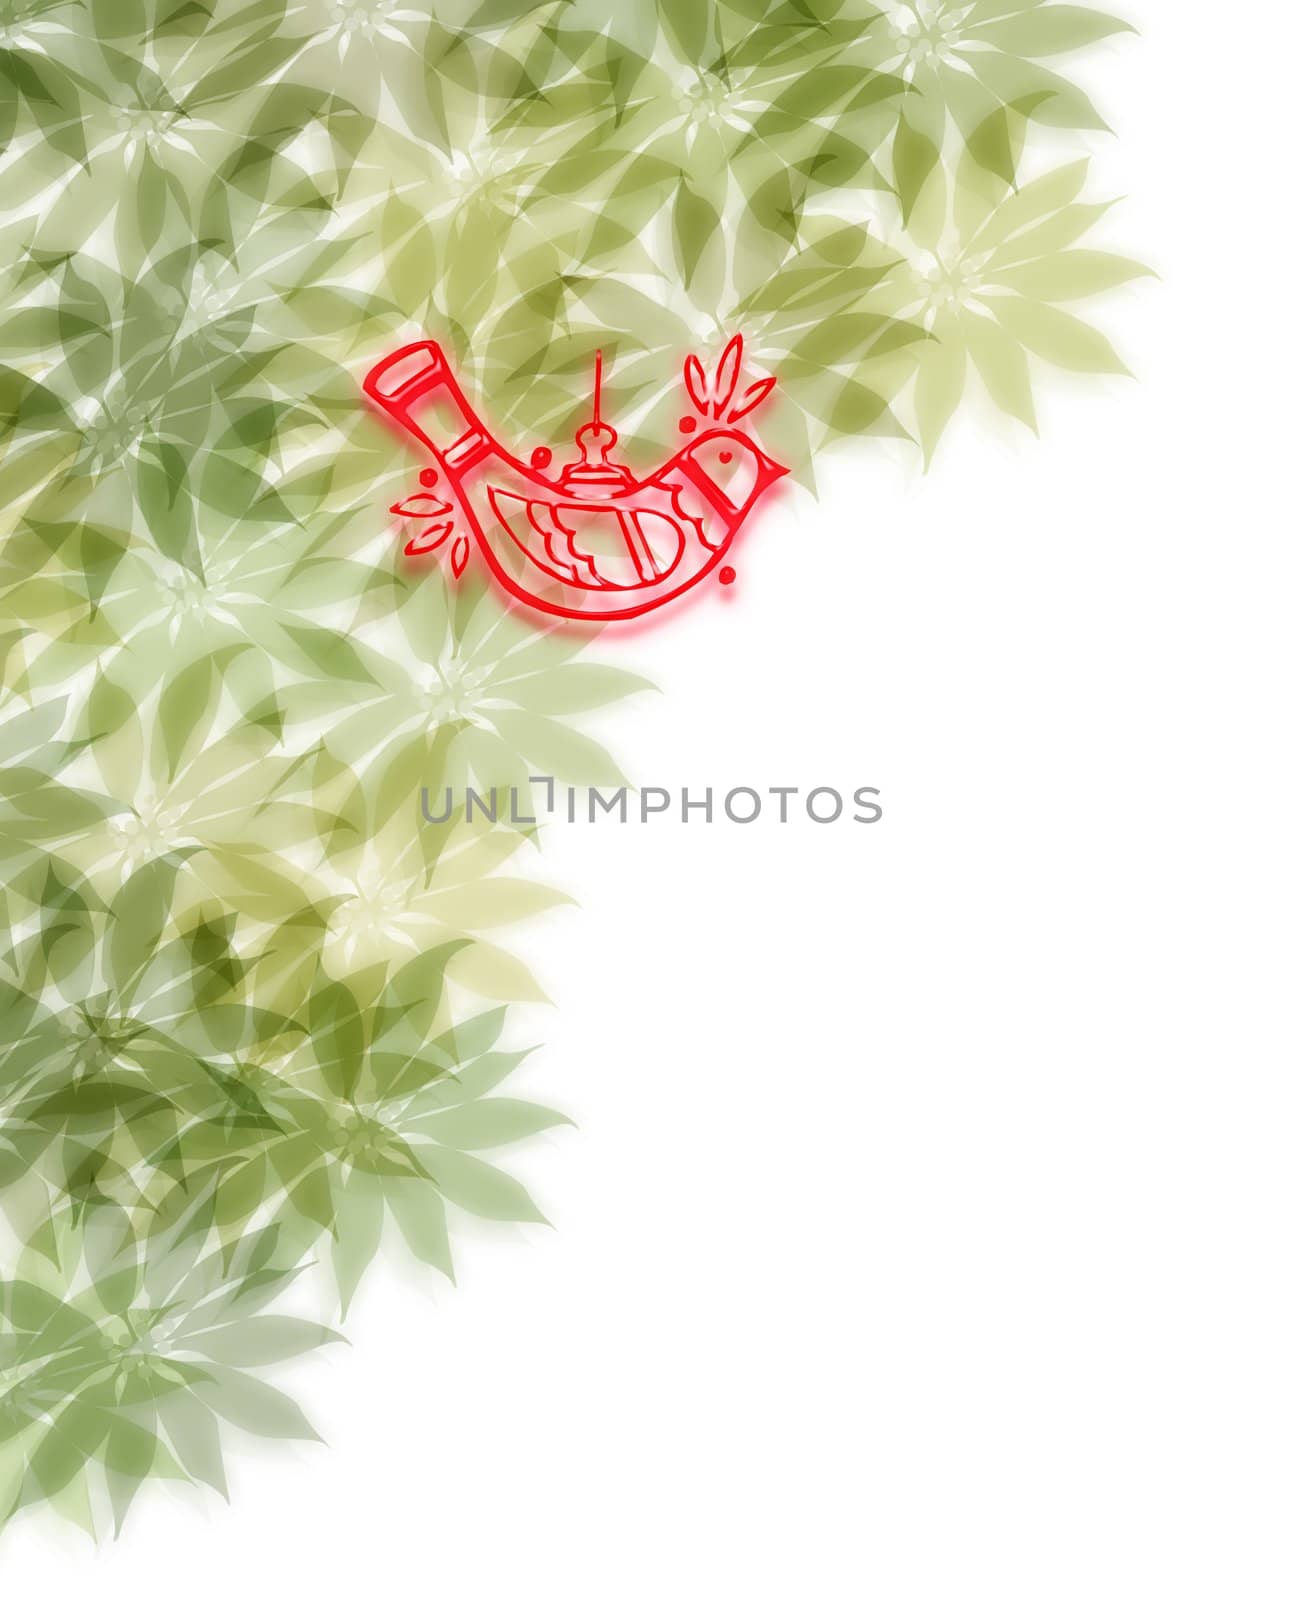 red decoration bird hanging in decor of soft green leaves